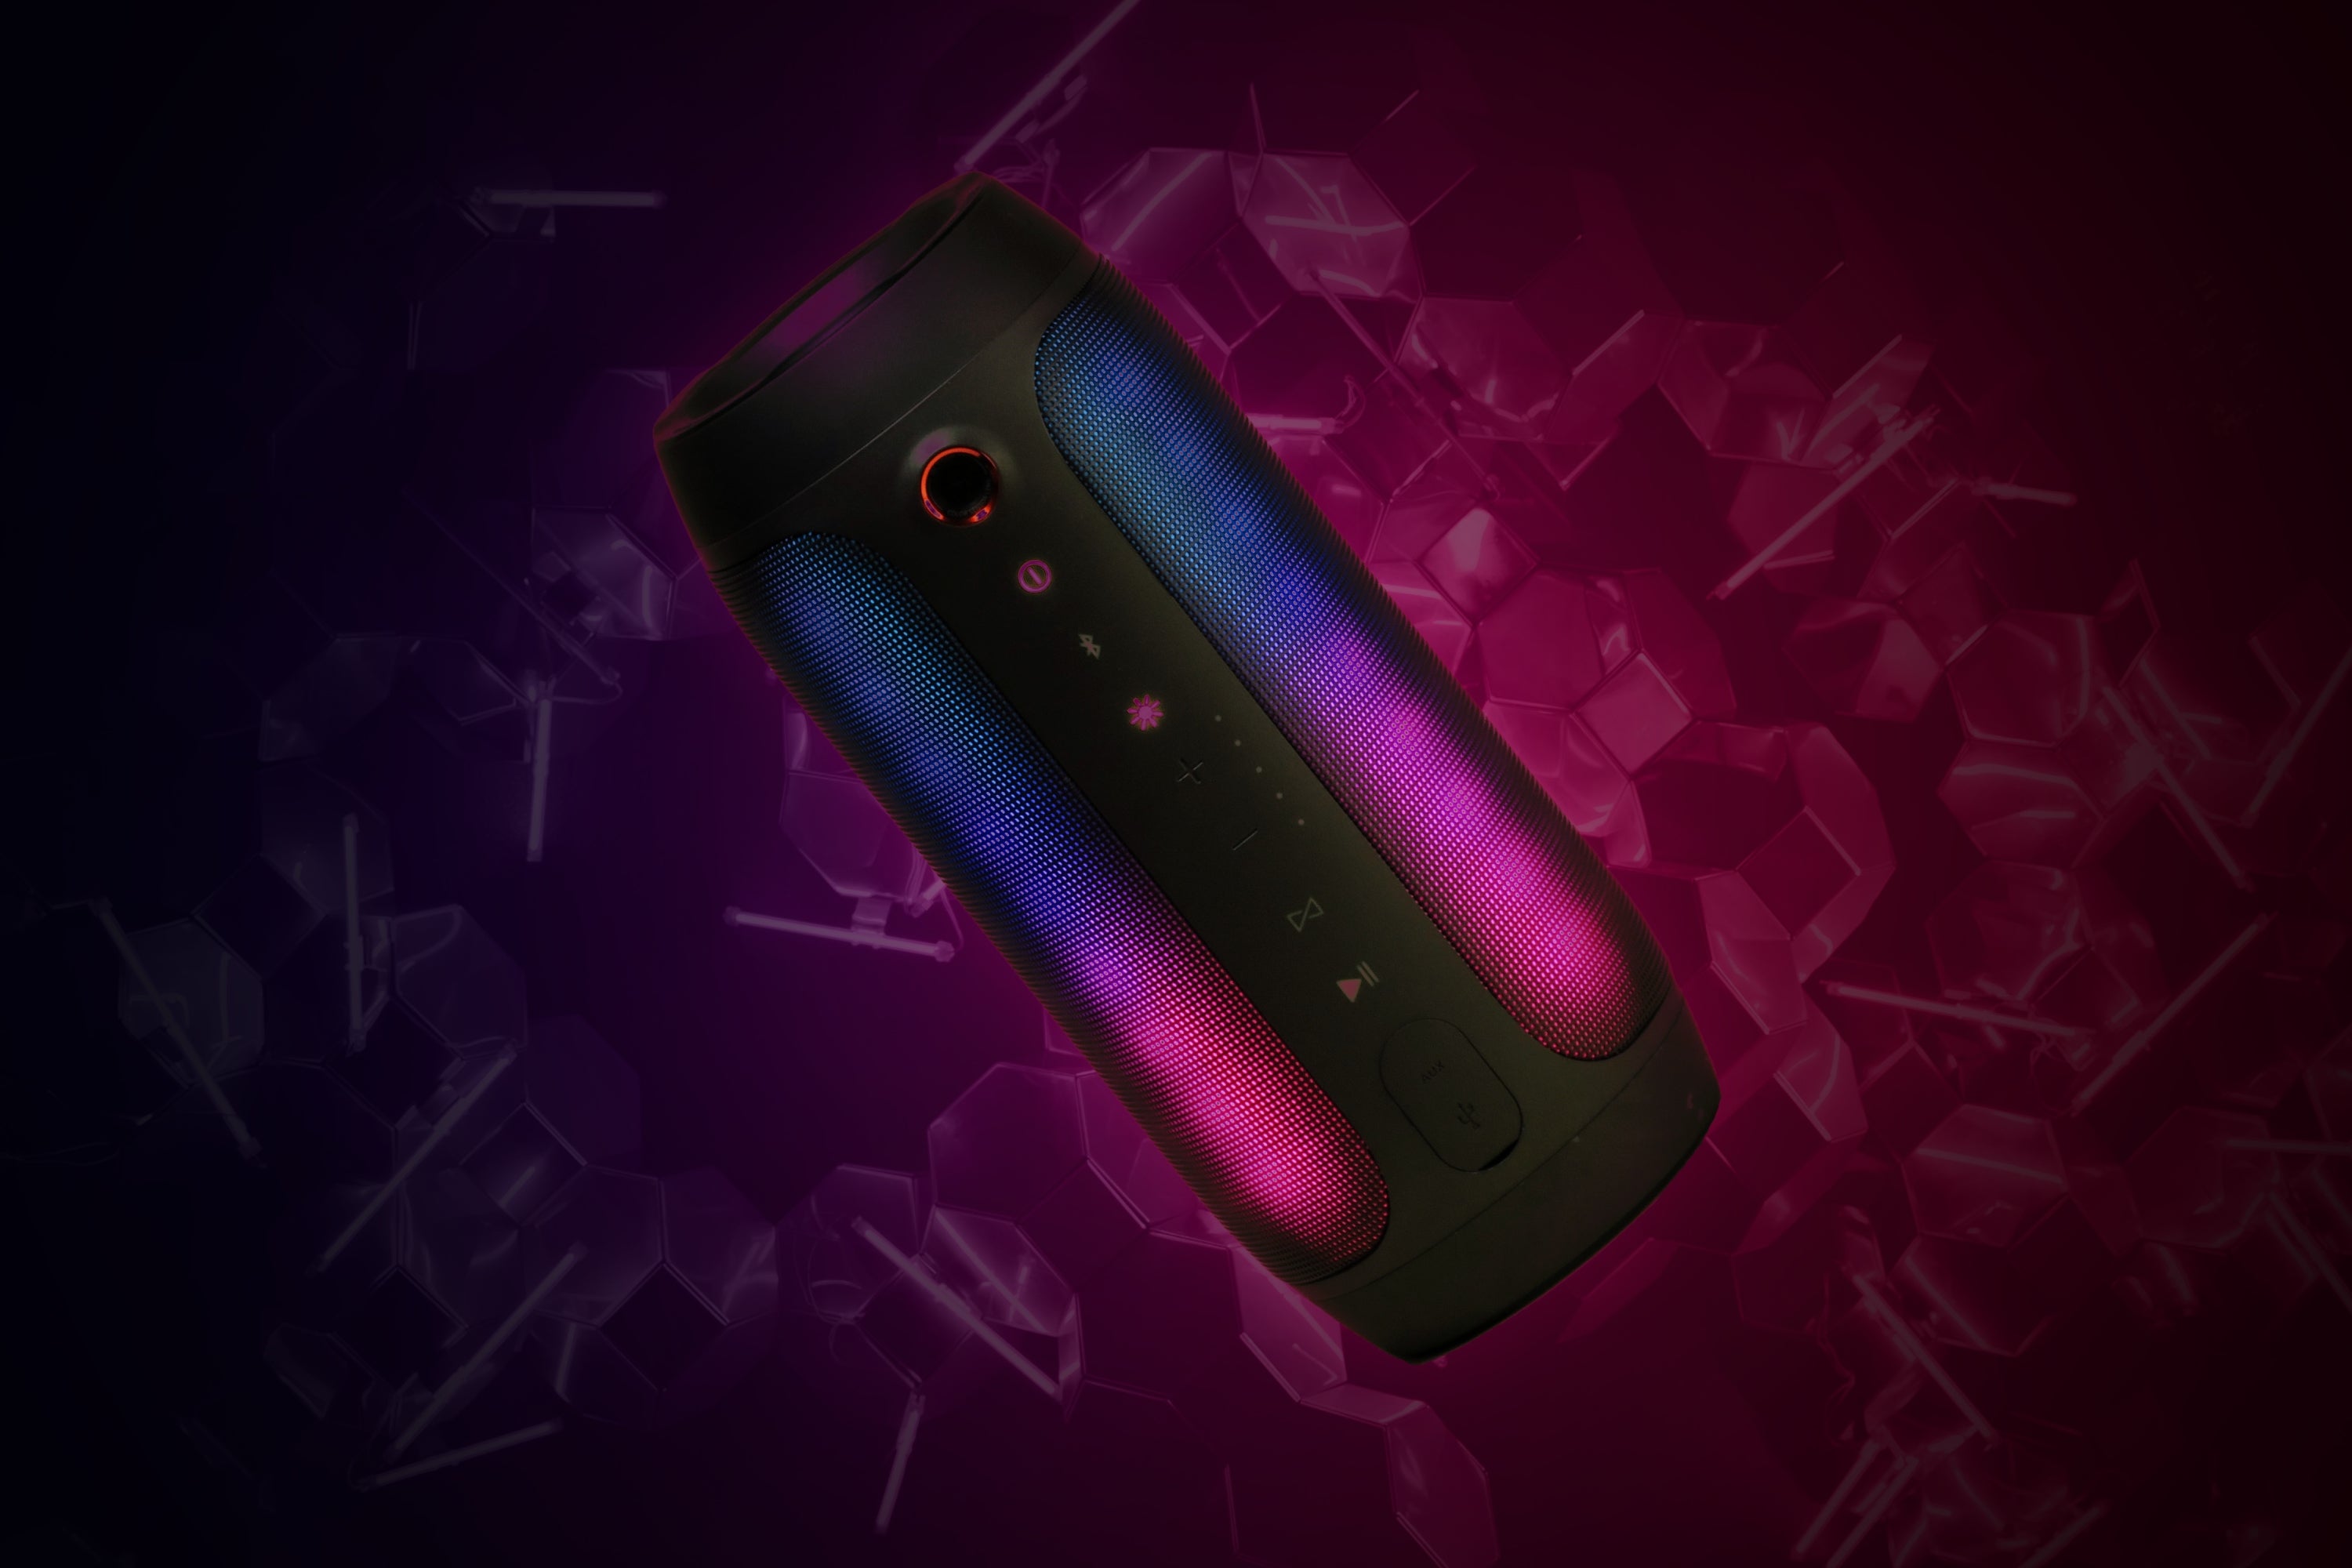 A wireless speaker in a dark pink abstract environment